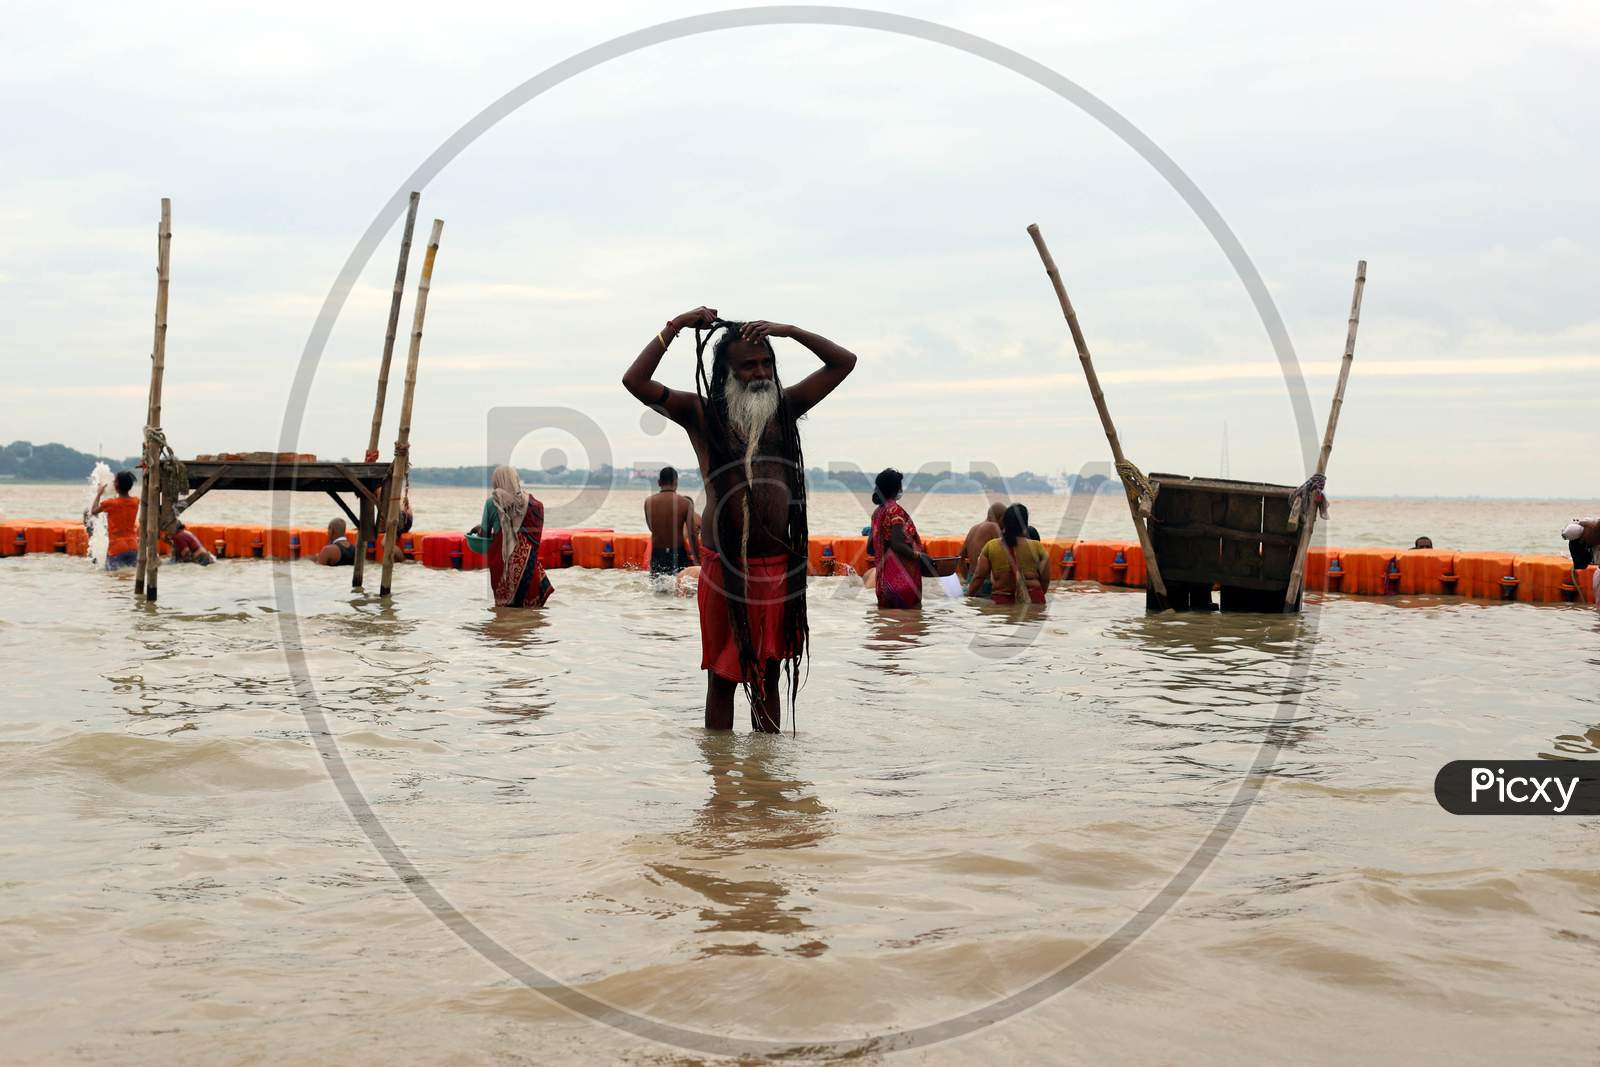 A Sadhu Or Holy Man Returns After Taking A Holy Bath In The Flood Water Of River Ganga In Prayagraj, August 29, 2020.